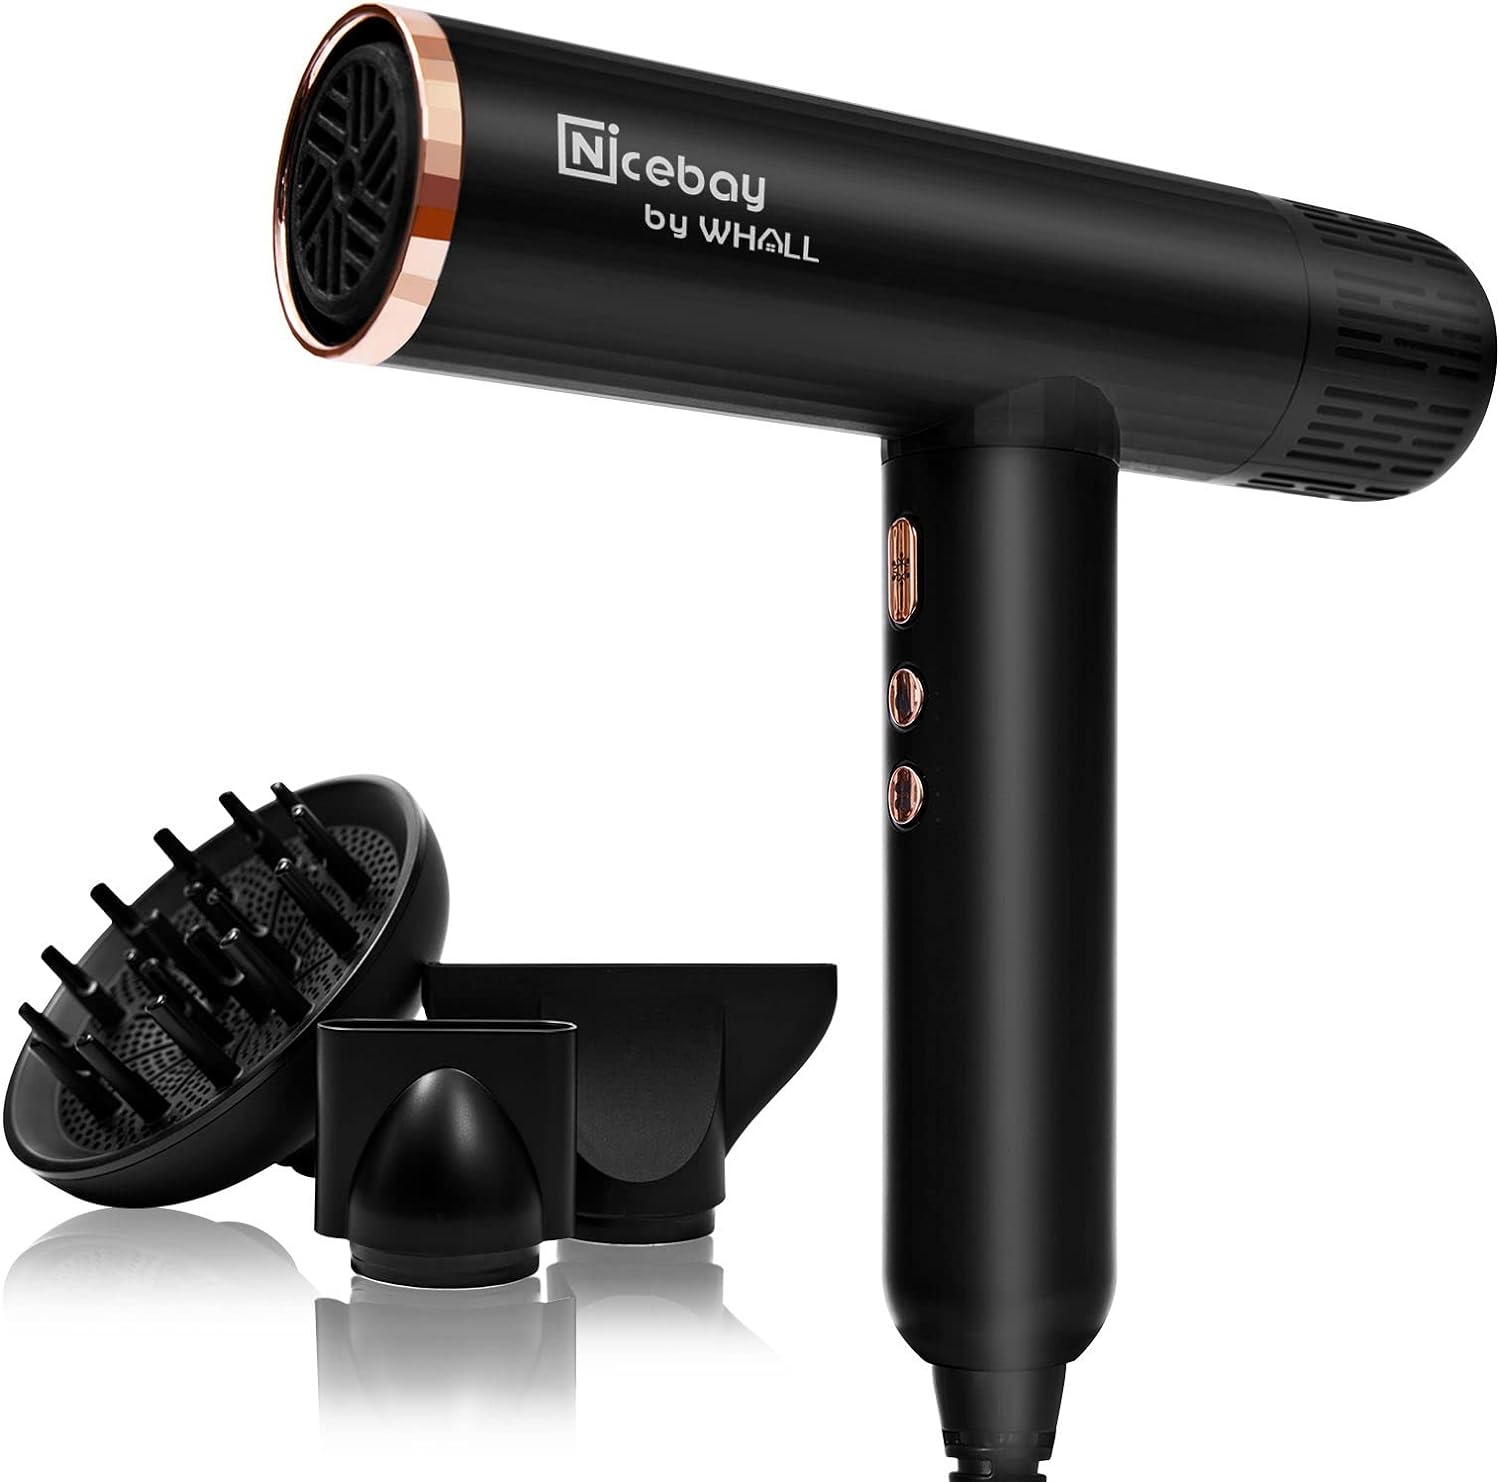 NICEBAY® Hair Dryer-Black&Gold , Professional Blow Dryer with 3 Attachments, 110000RPM High-Speed Brushless Motor for Fast Drying, Lightweight, Low Noise, 1600W Hairdryer with Diffuser